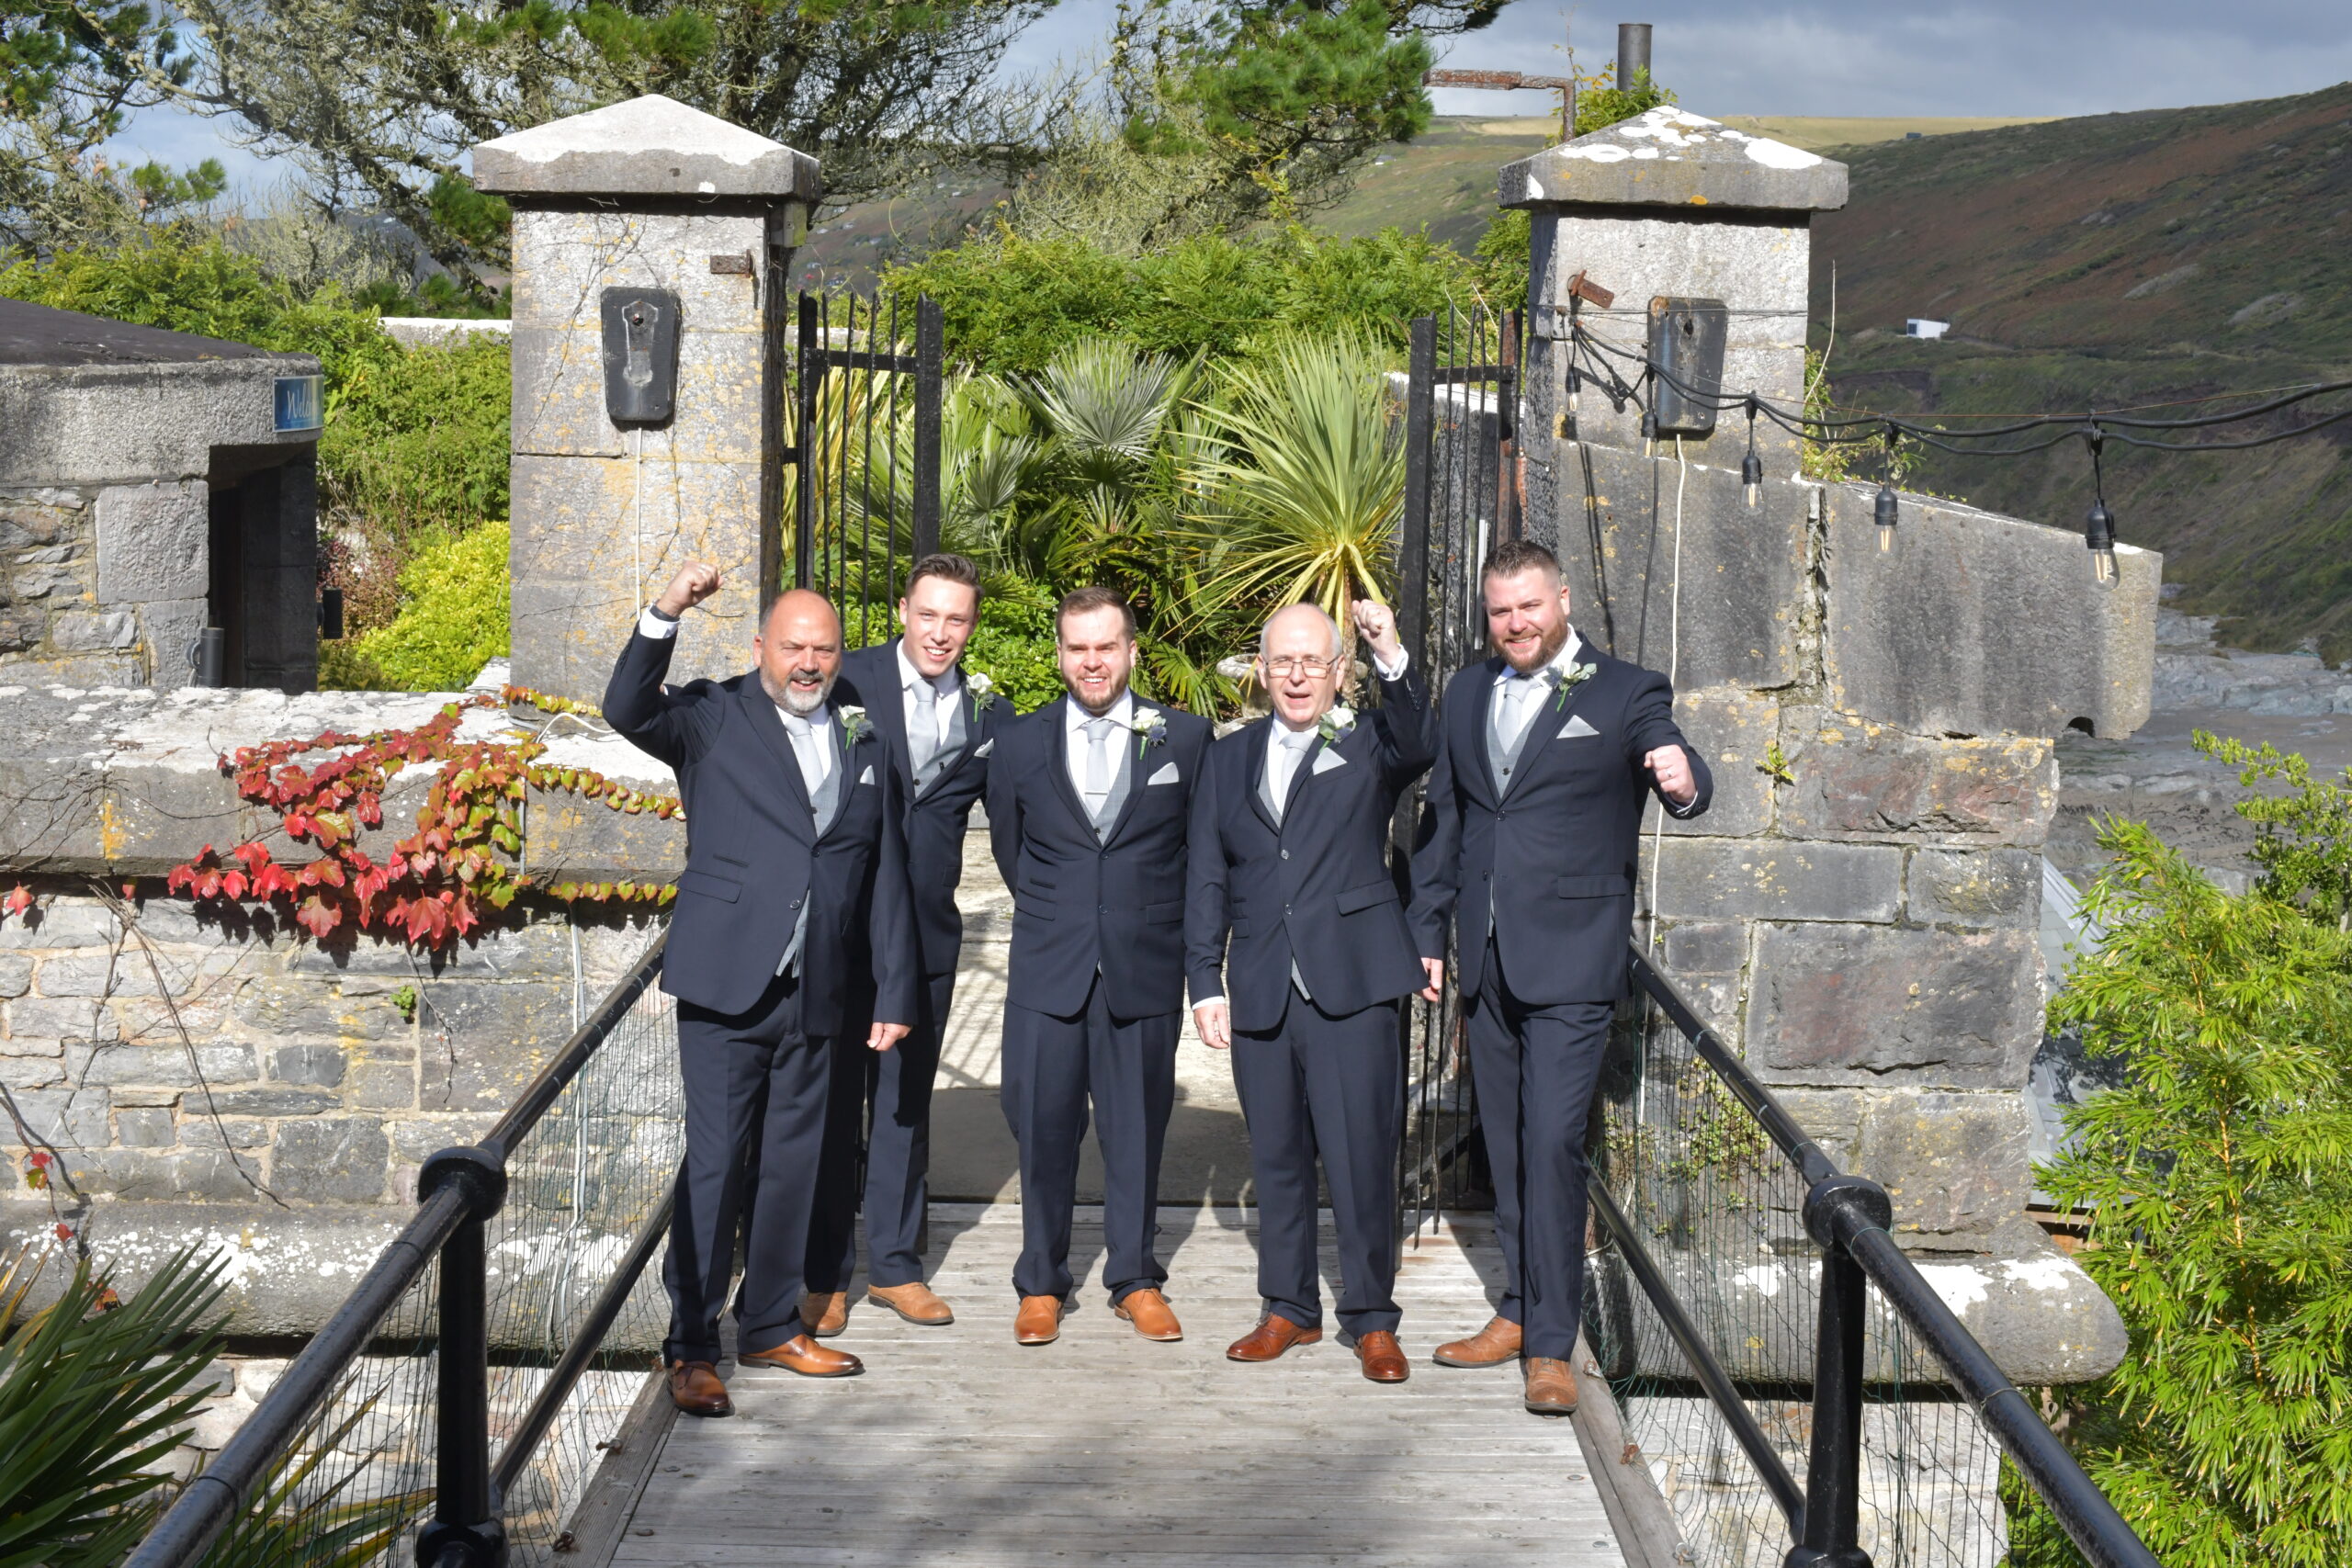 The groomsmen on the Bridge at Polhawn Fort